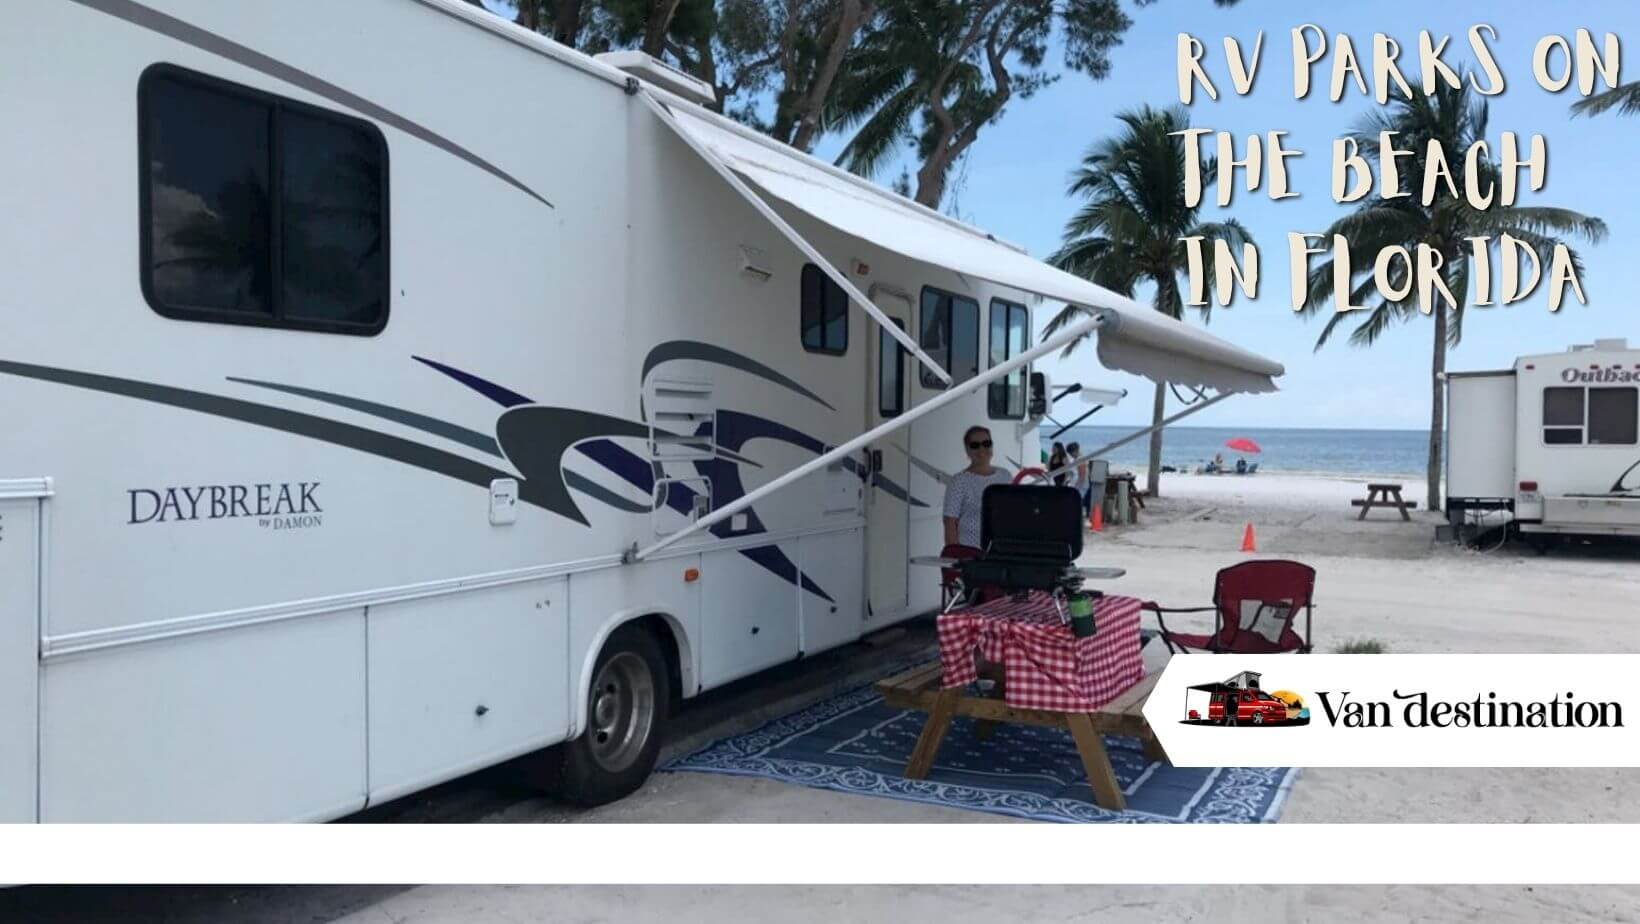 RV Parks On The Beach in Florida